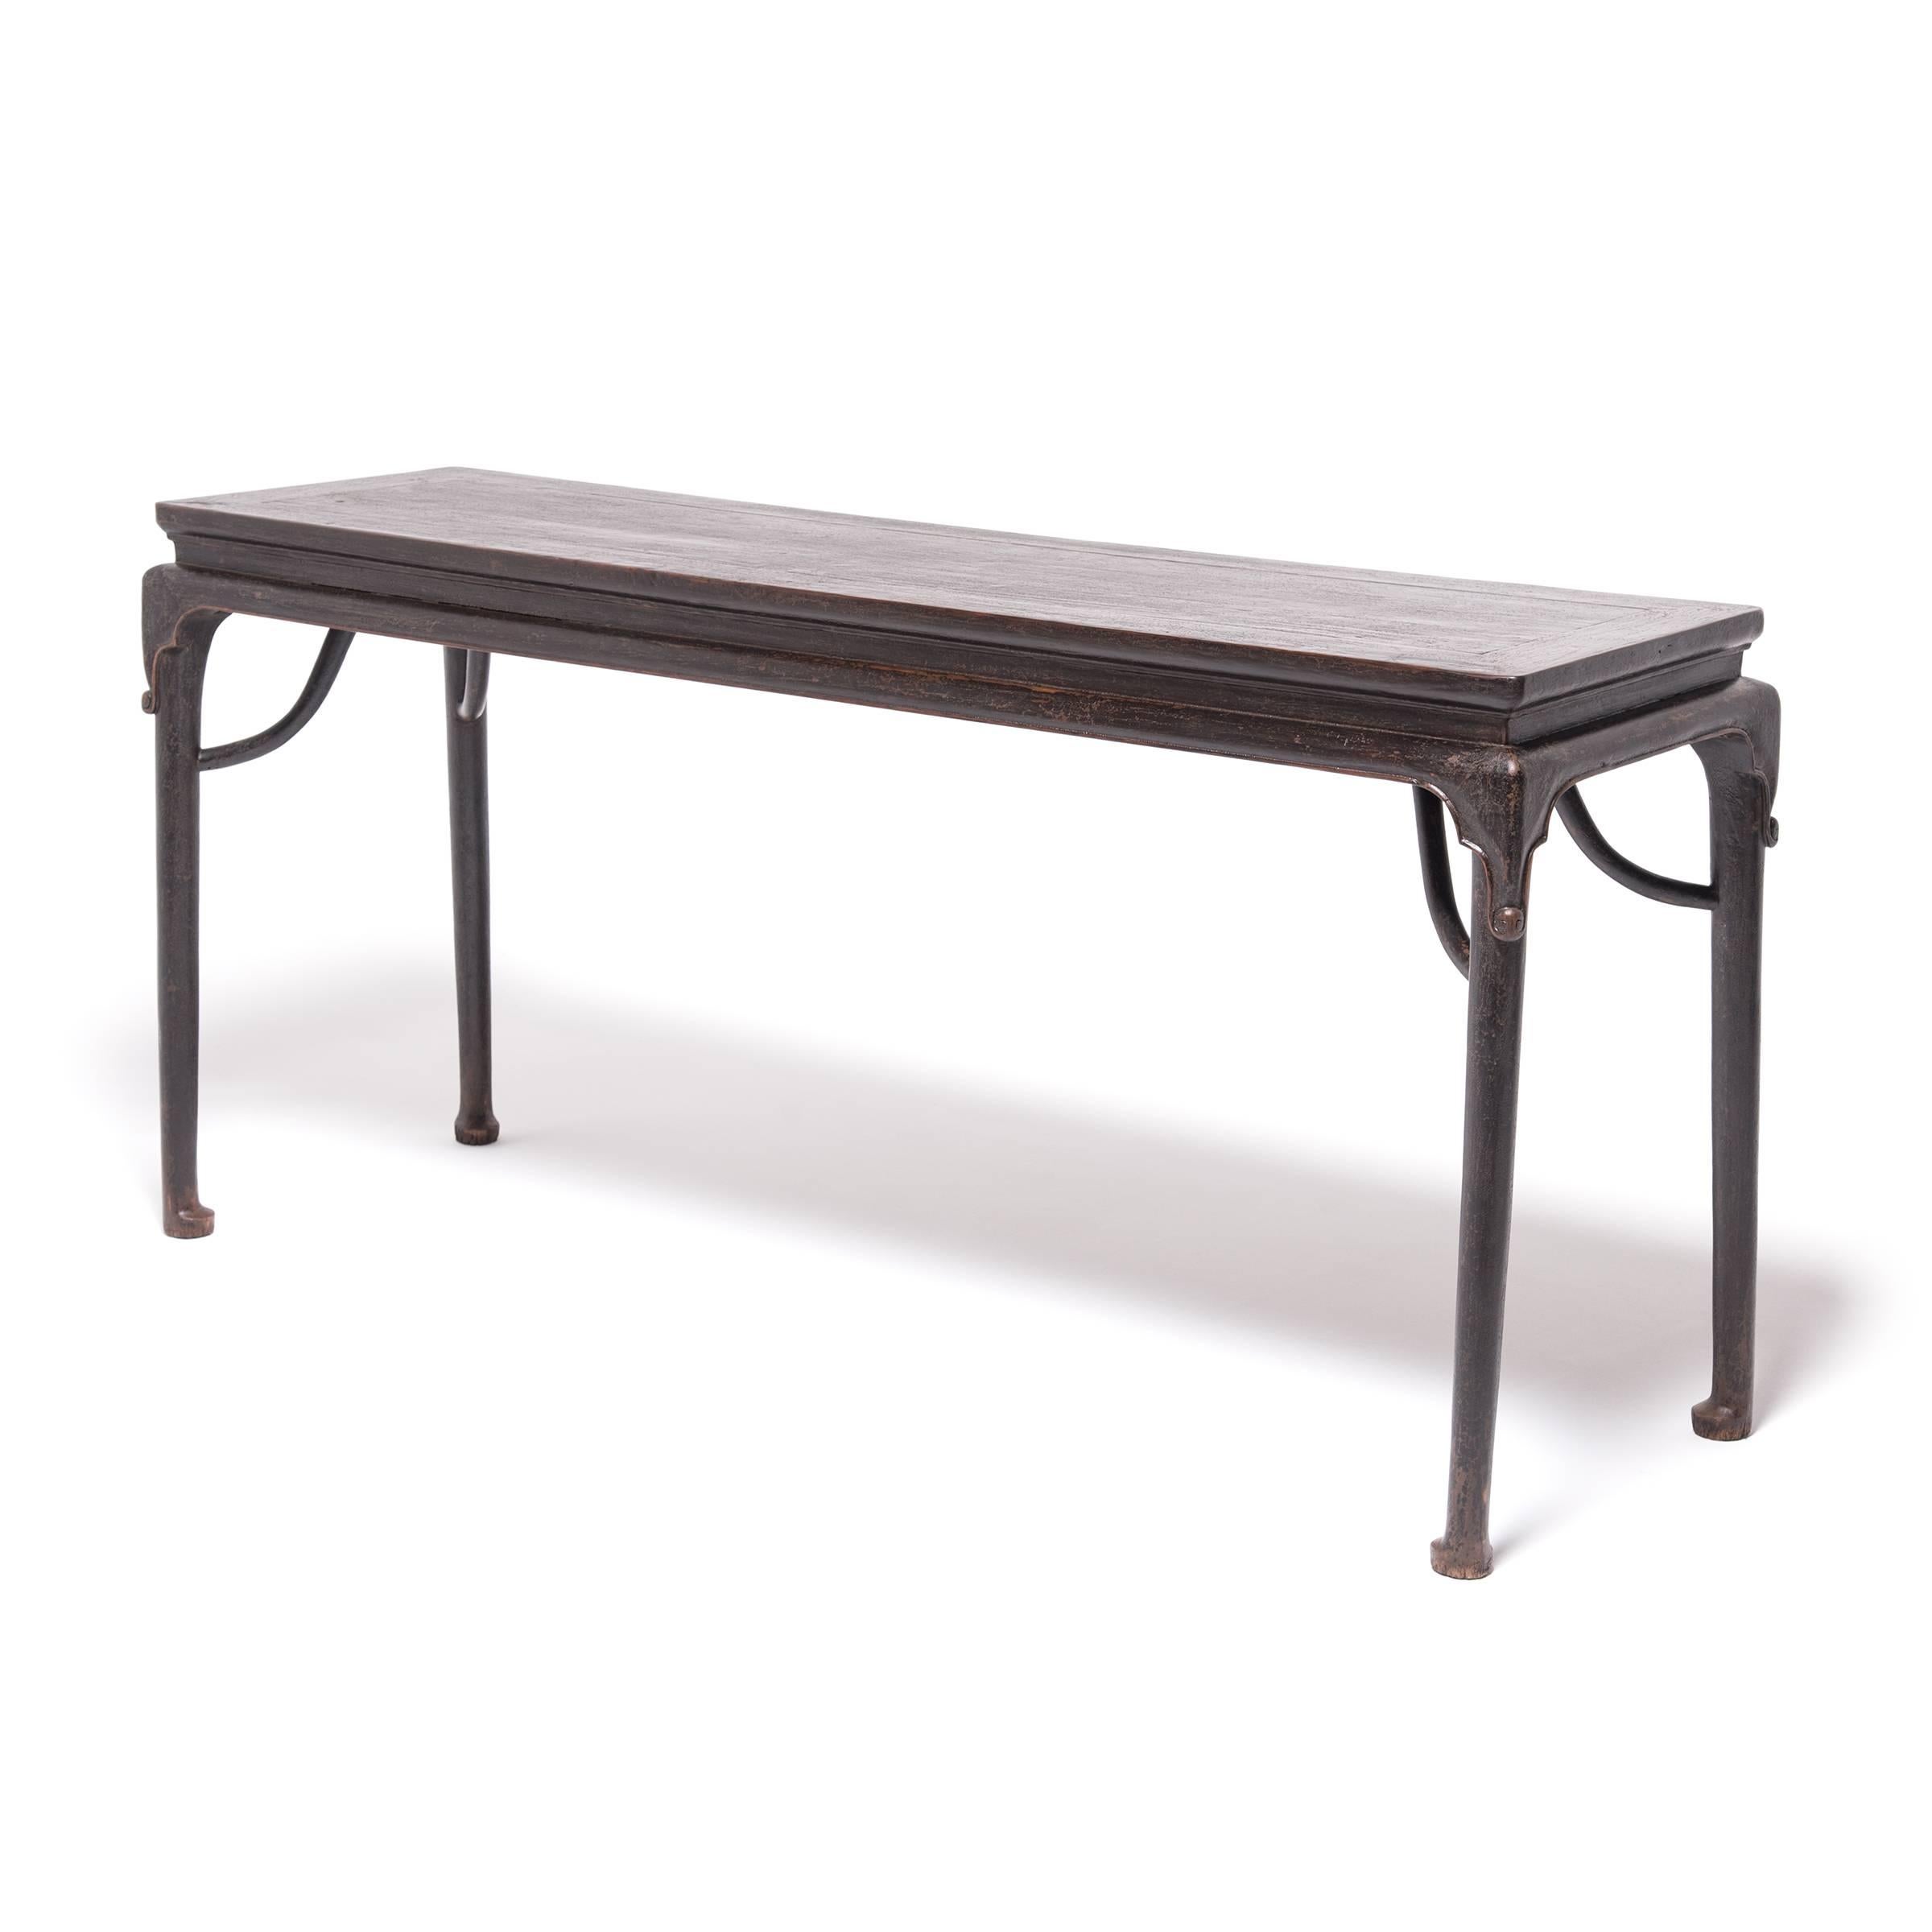 This streamlined design from the mid-19th century anticipates the clean-lined appeal of modernism with subtle curves that anchor it in the refined style of the Ming dynasty. Flowing lines emerge from the table’s waist forming slender legs with hoof